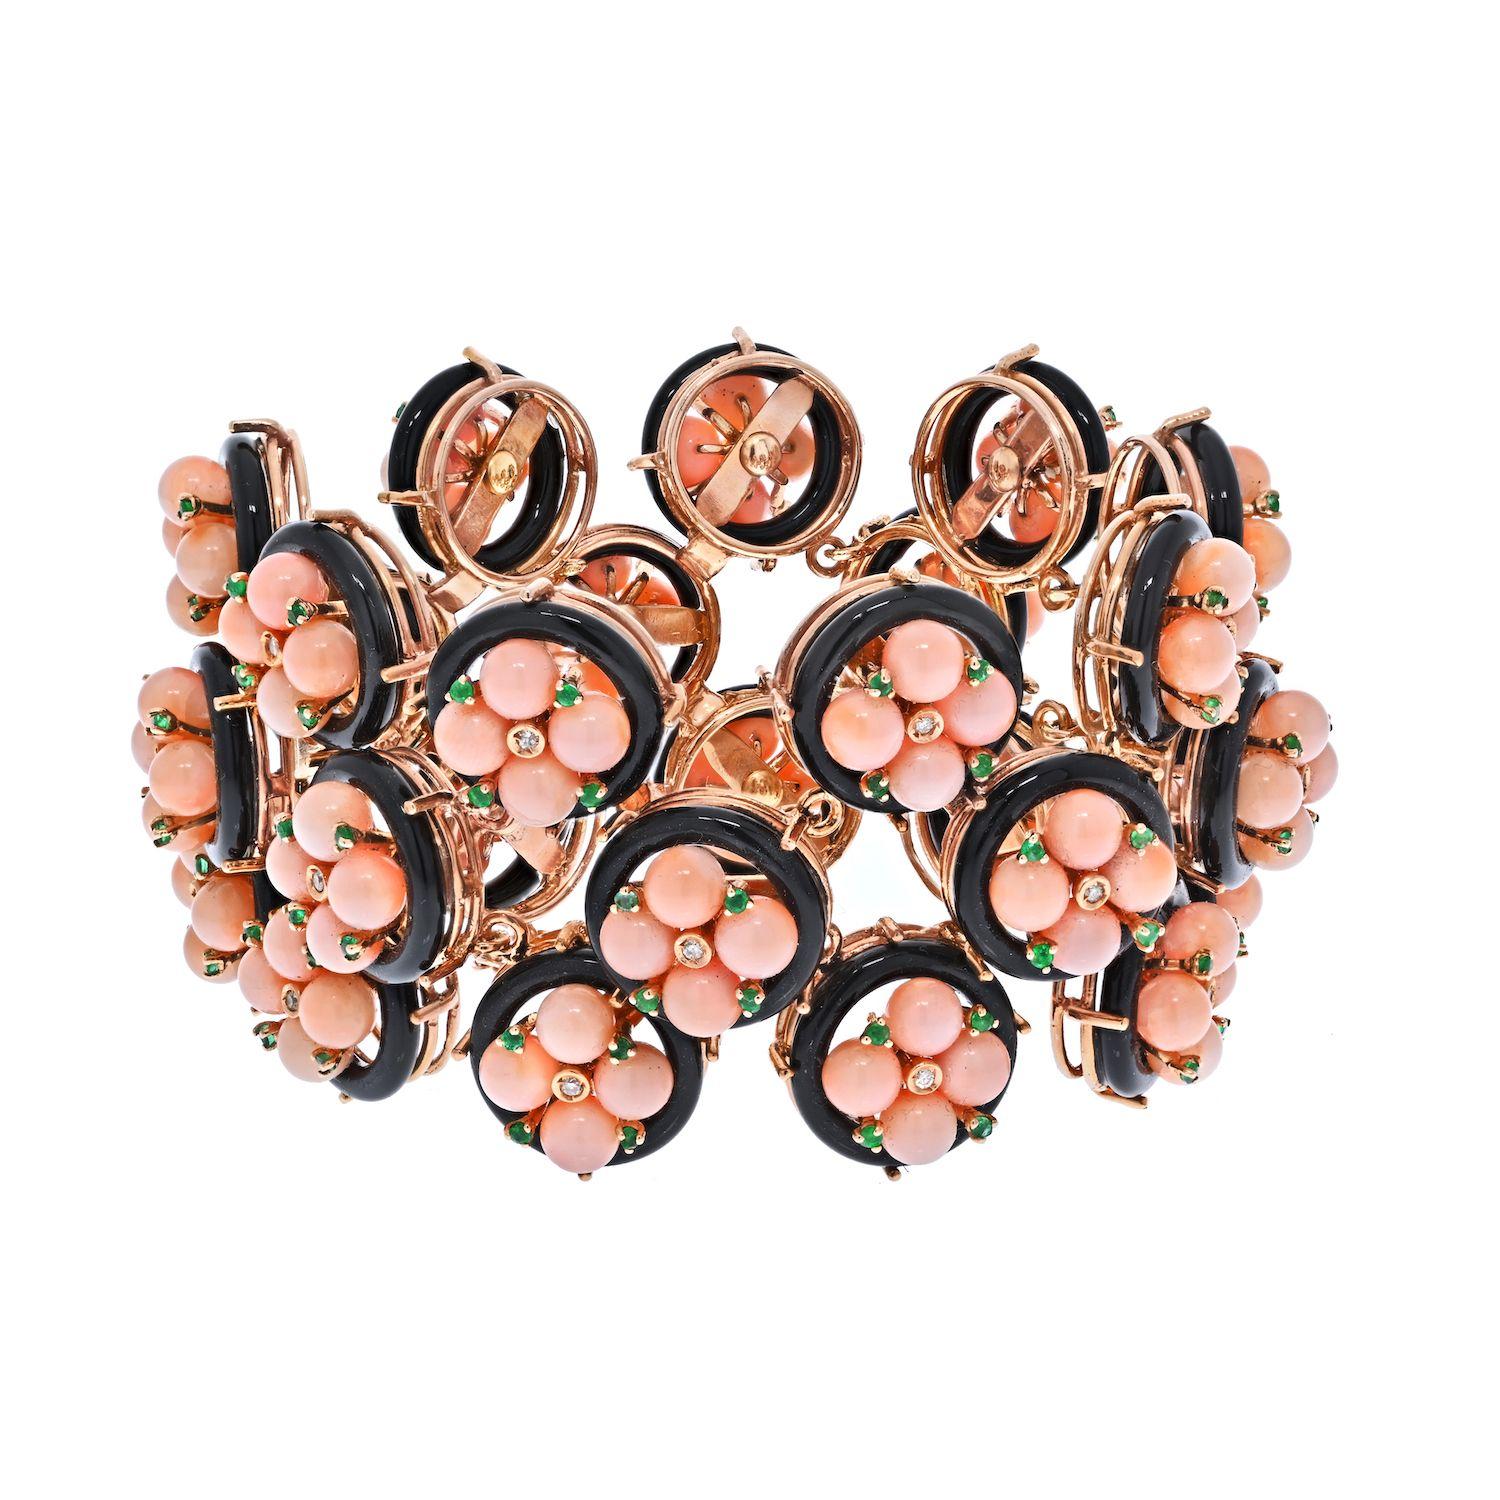 With over 60 shades of coral you will be delighted to see this genuine baby pink coral bracelet. It is fashioned in a link style sectional and is quite wide: about 2 inches. The bracelet is desinged in a multi-row station fashion and features coral